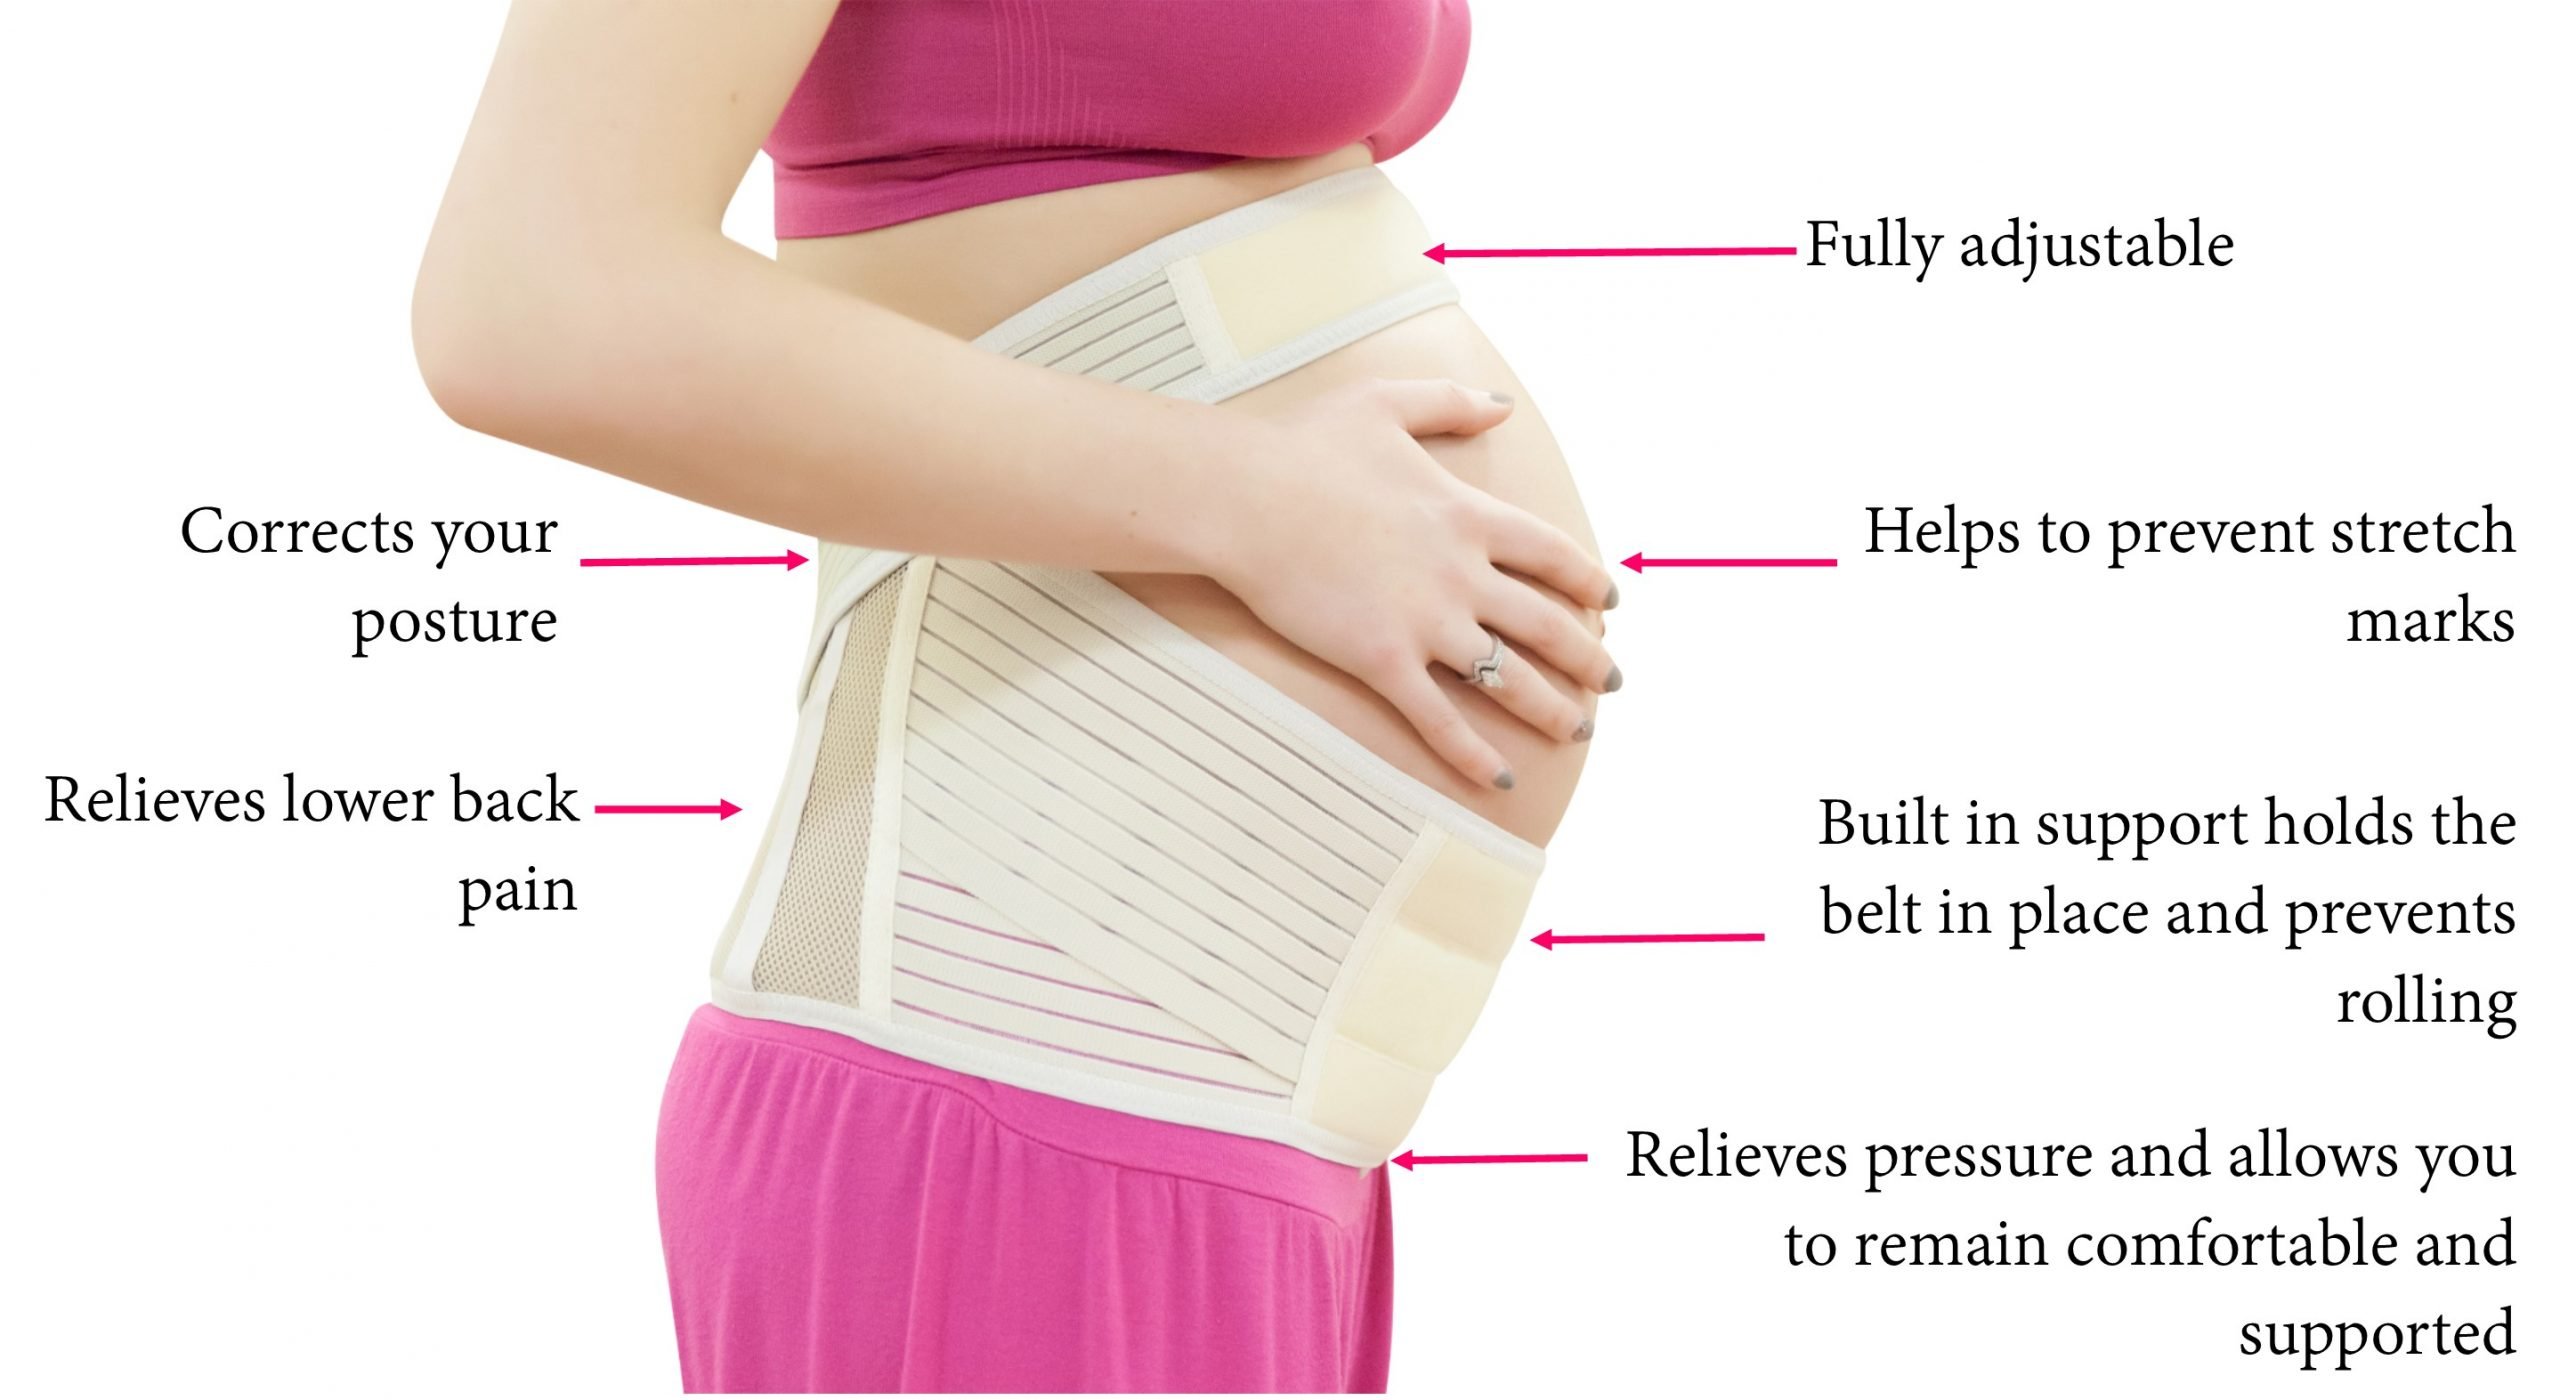 5 Reasons Why Active Women Need a Bump Belt During Pregnancy